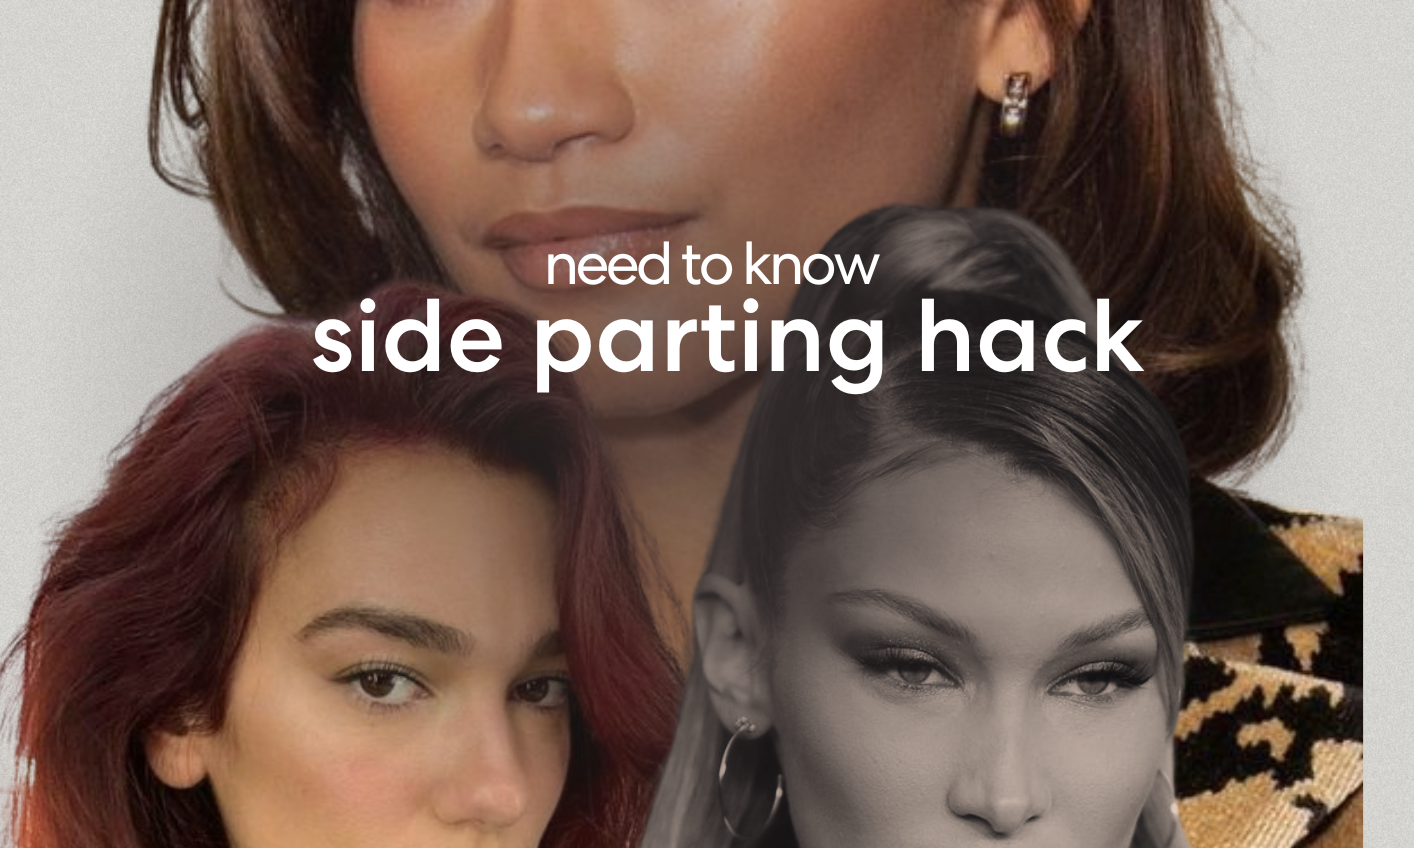 Need-to-know-side-parting-hack